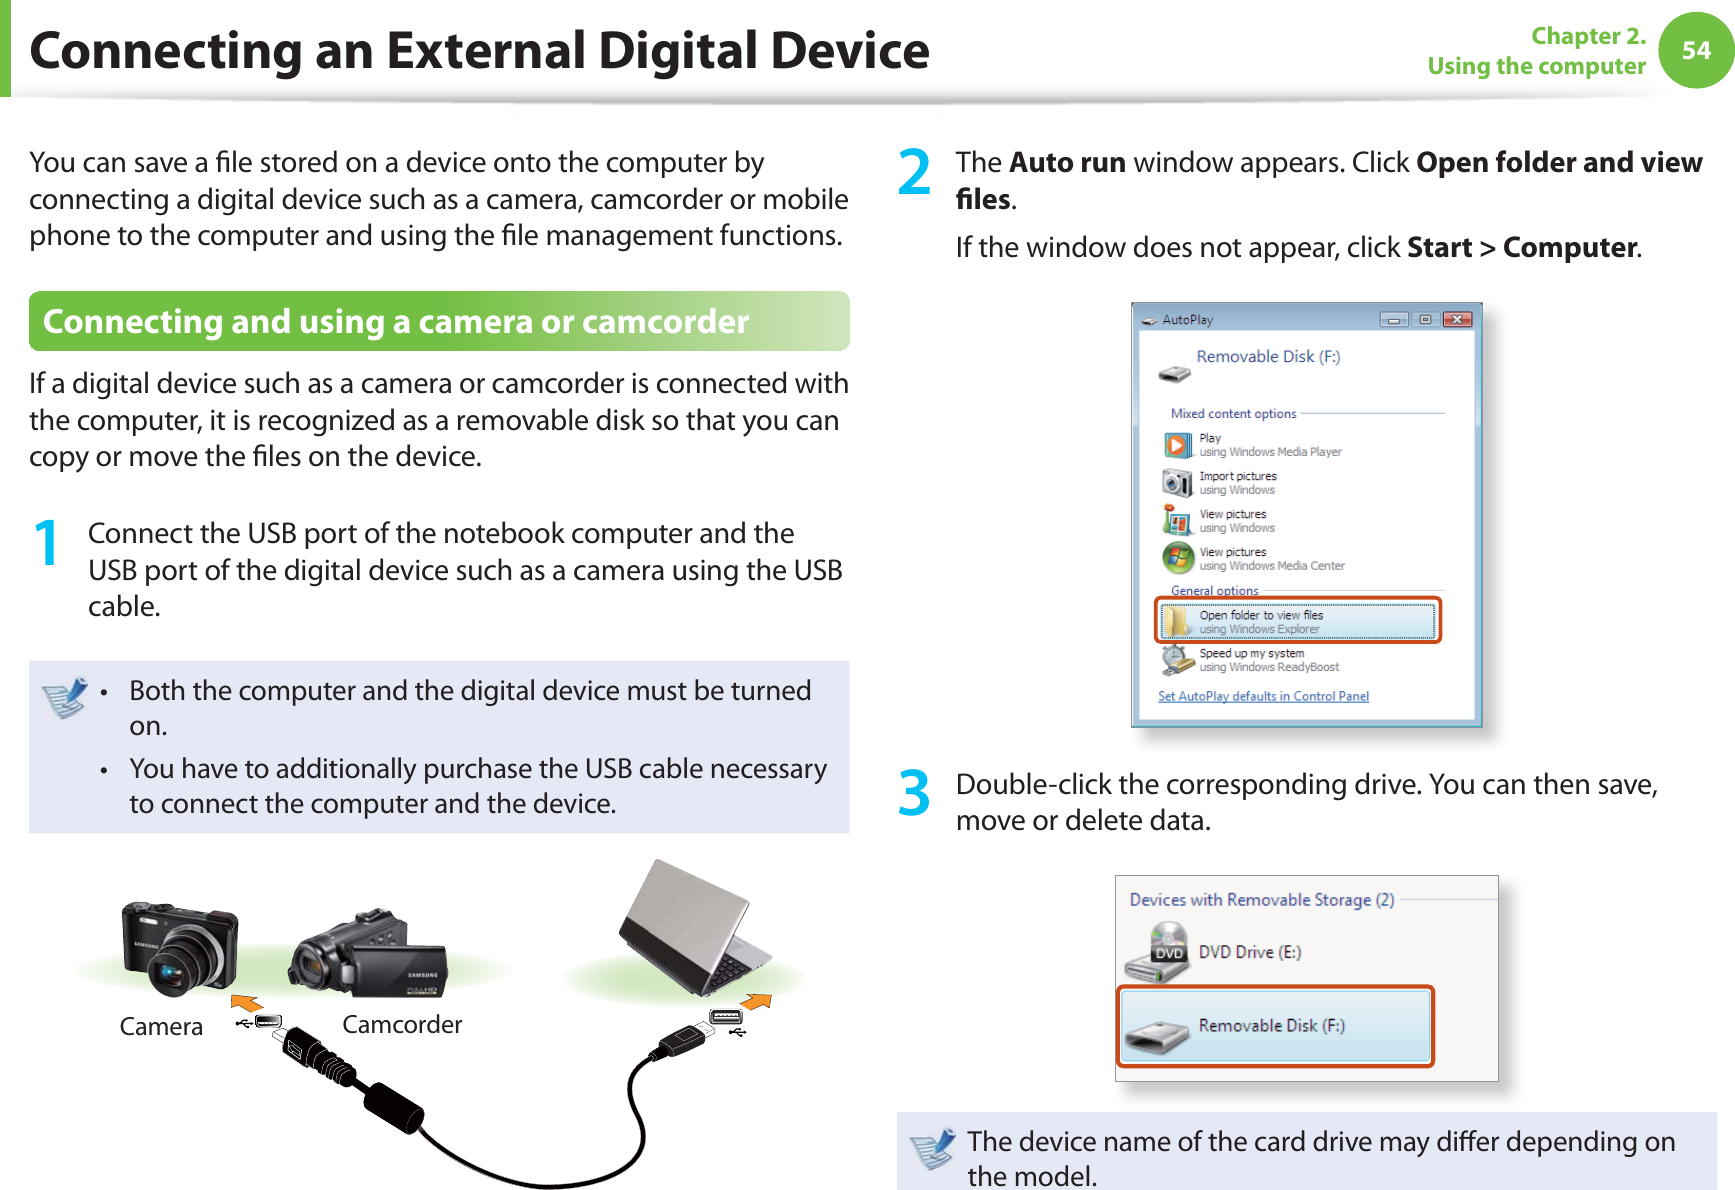 54Chapter 2. Using the computerConnecting an External Digital DeviceYou can save a ﬁ le stored on a device onto the computer by connecting a digital device such as a camera, camcorder or mobile phone to the computer and using the ﬁ le management functions.Connecting and using a camera or camcorderIf a digital device such as a camera or camcorder is connected with the computer, it is recognized as a removable disk so that you can copy or move the ﬁ les on the device.1  Connect the USB port of the notebook computer and the USB port of the digital device such as a camera using the USB cable.Both the computer and the digital device must be turned t on. You have to additionally purchase the USB cable necessary t to connect the computer and the device.Camera Camcorder2 The Auto run window appears. Click Open folder and view ﬁ les.If the window does not appear, click Start &gt; Computer.3  Double-click the corresponding drive. You can then save, move or delete data.The device name of the card drive may diﬀ er depending on the model.